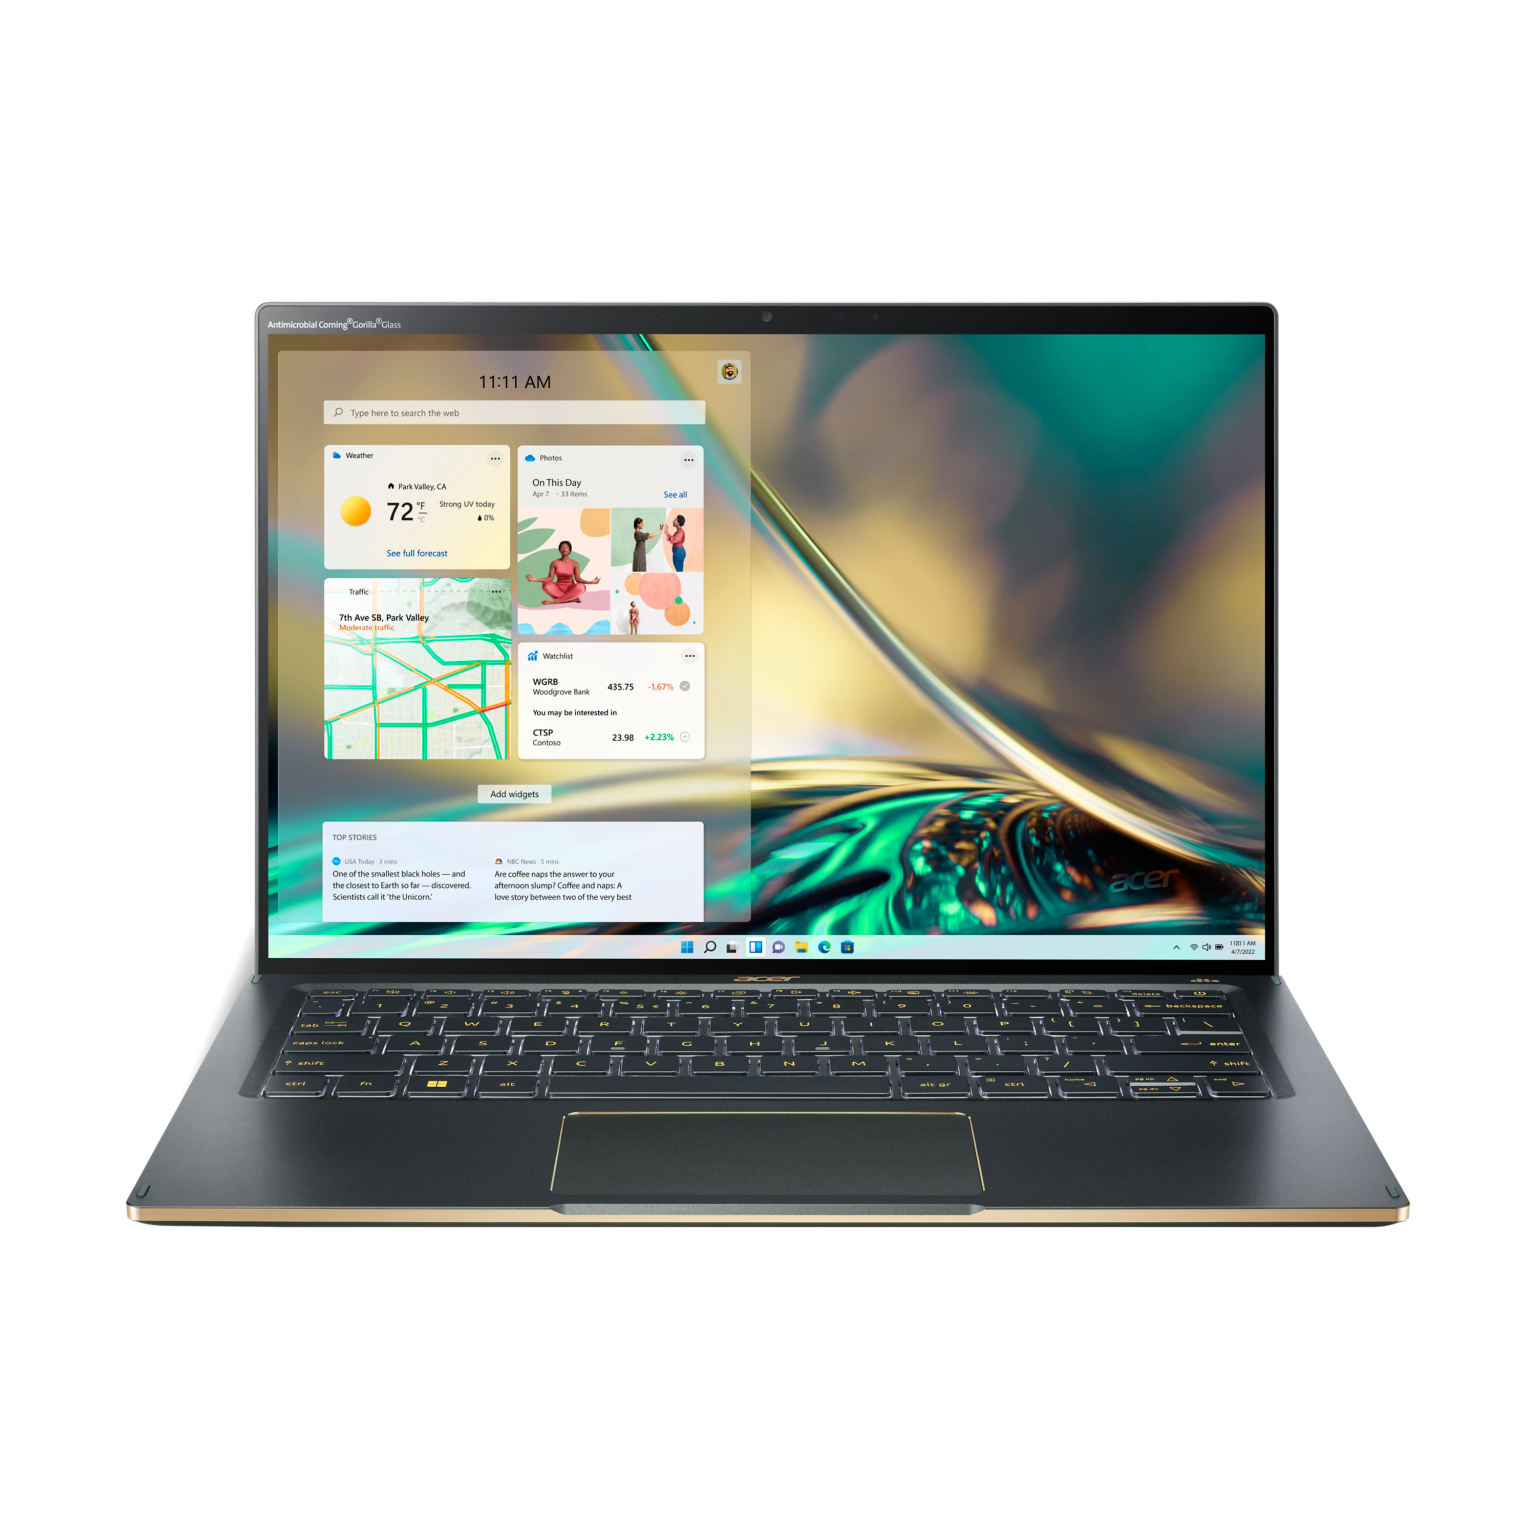 Acer Swift 5 SF514-56 with Antimicrobial, Fingerprint, Backlit and Windows 11 in Mist Green (main)